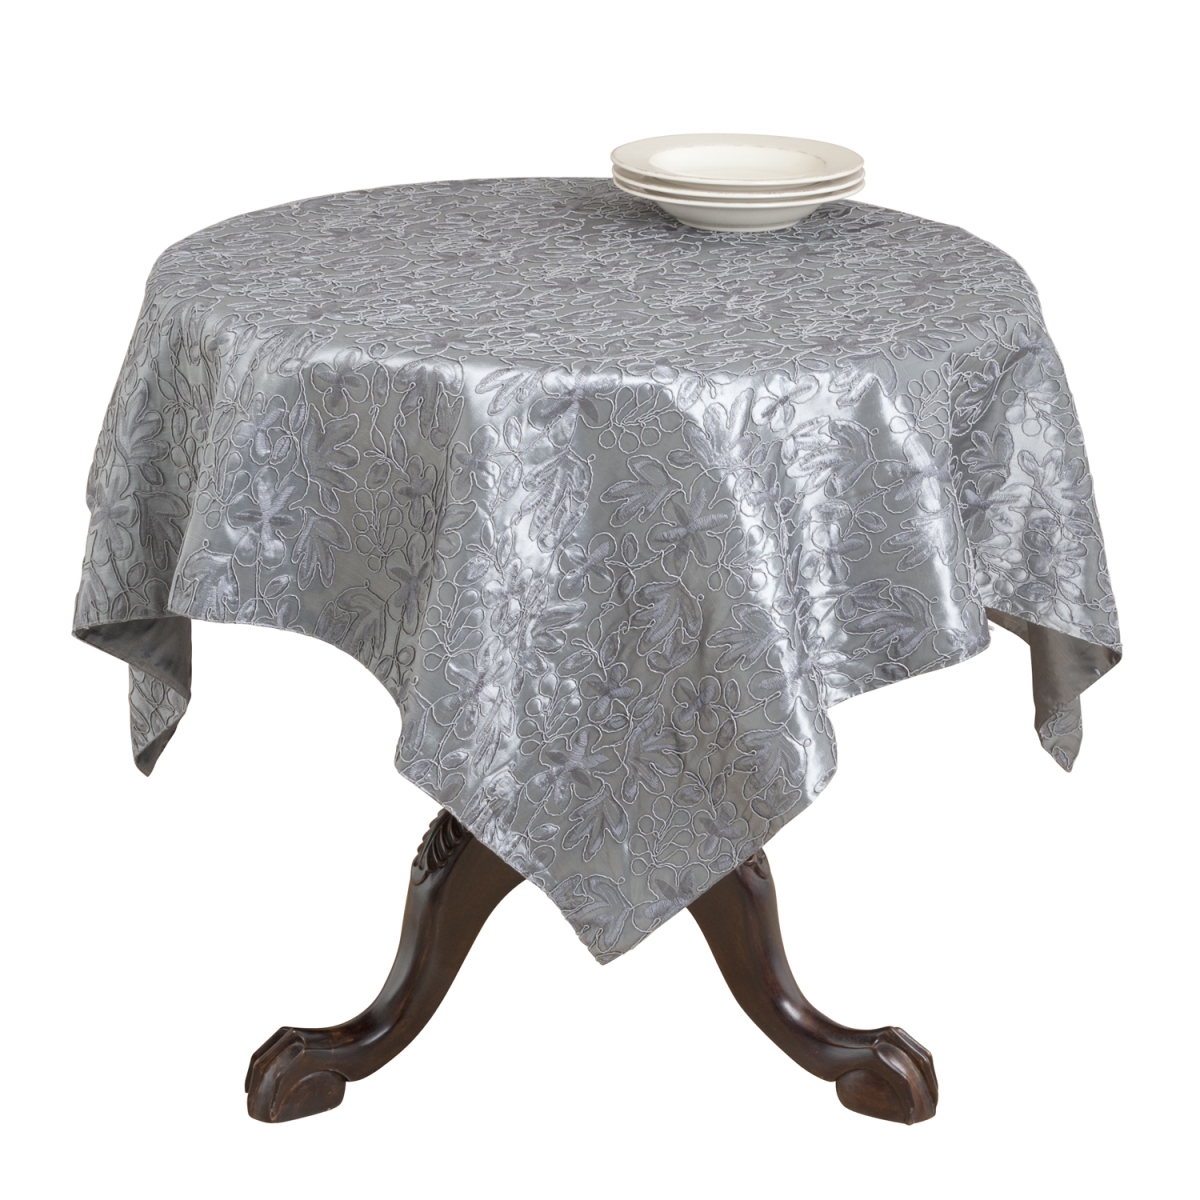 UPC 789323245694 product image for 92010.PW50S 50 in. Toscana Square Cord Embroidery Table Linens - Pewter | upcitemdb.com